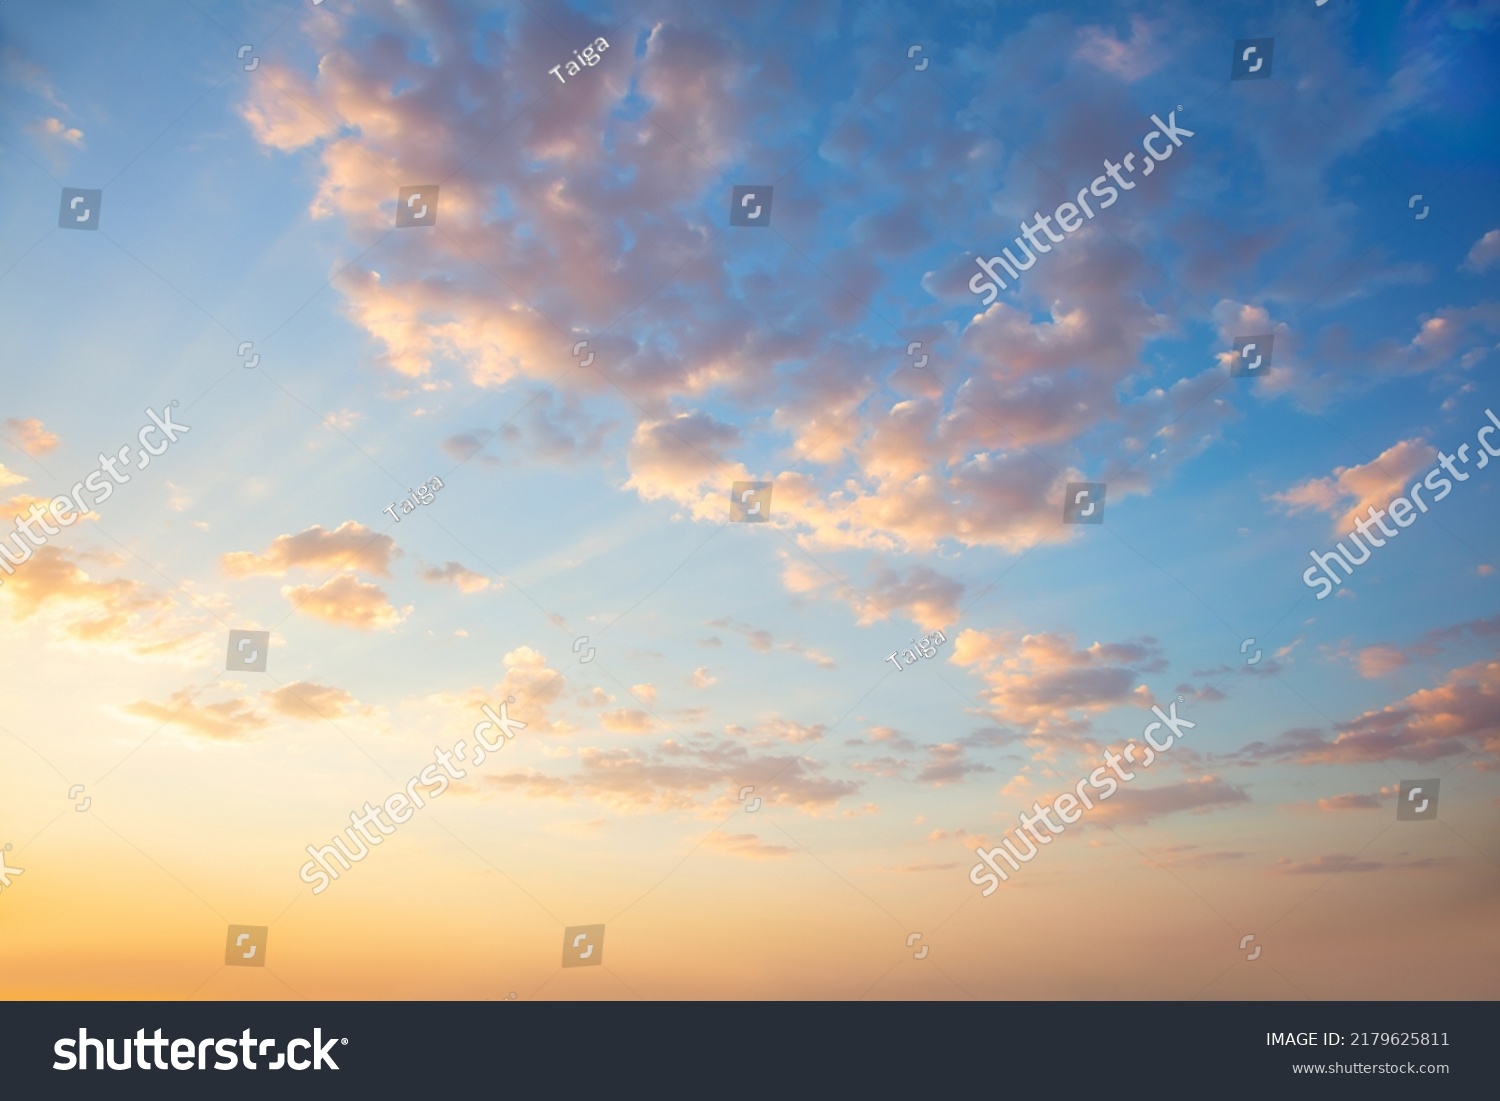 Pastel Gentle colors of  Sunset  Sunrise Sundown Sky with colorful clouds without any birds #2179625811